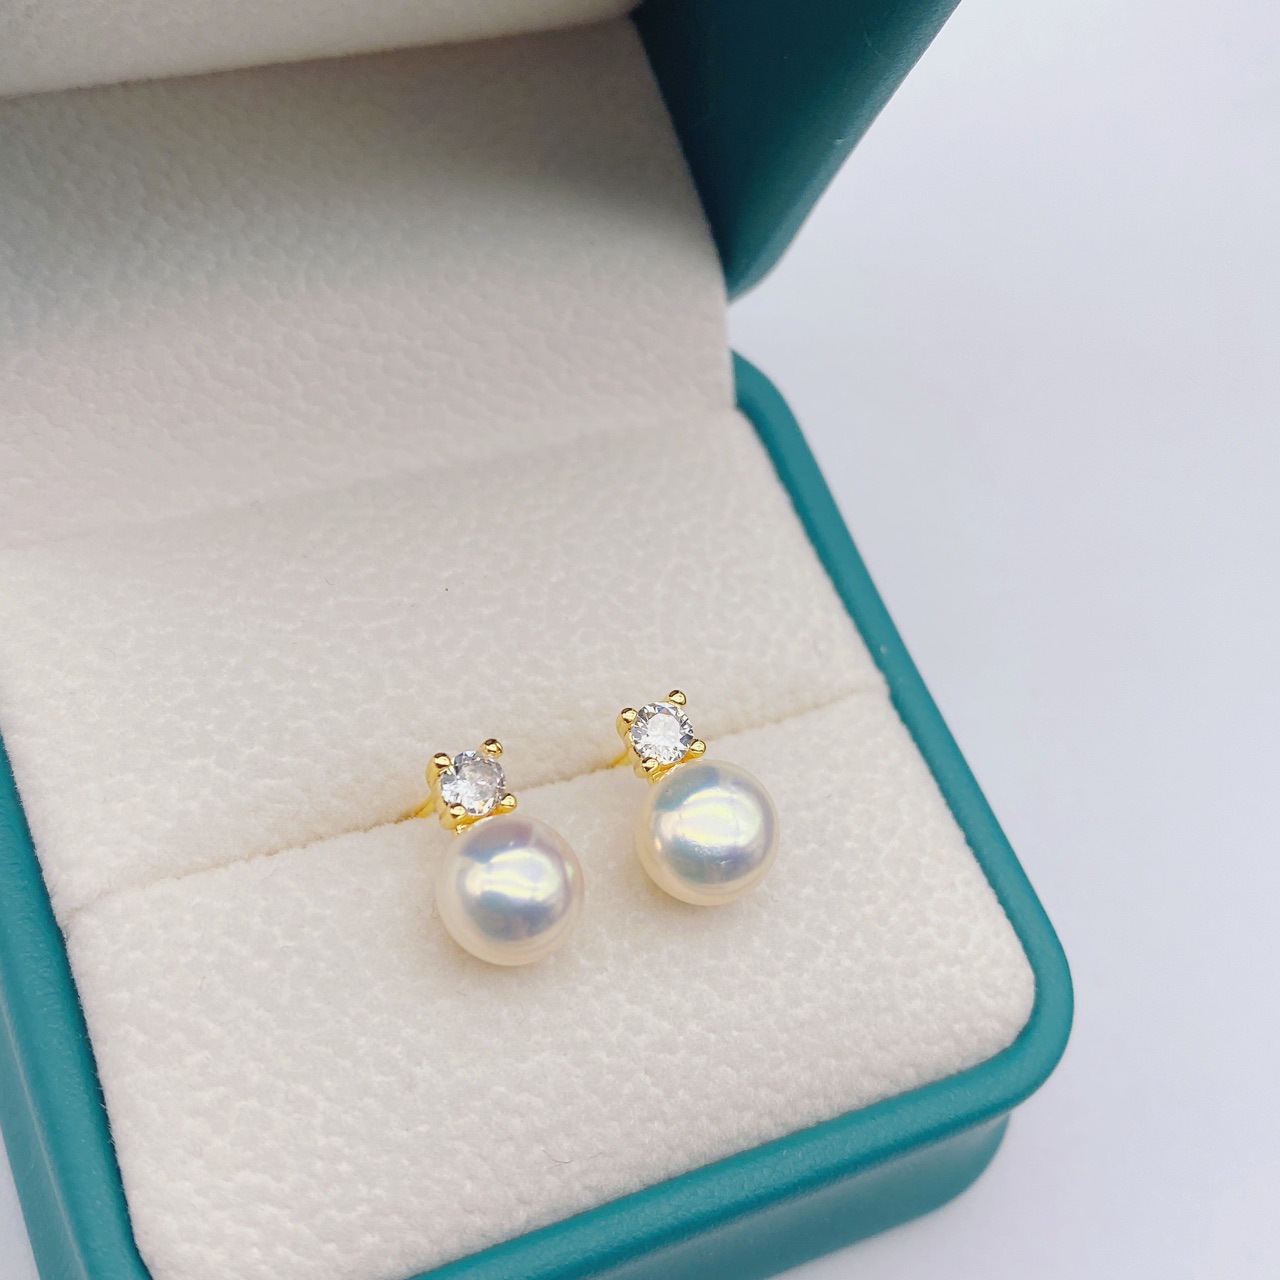 Classic Princess S925 Silver Pin Stud Earrings Natural Freshwater Pearl 7-8mm Surface Basically Flawless Pearl Earrings